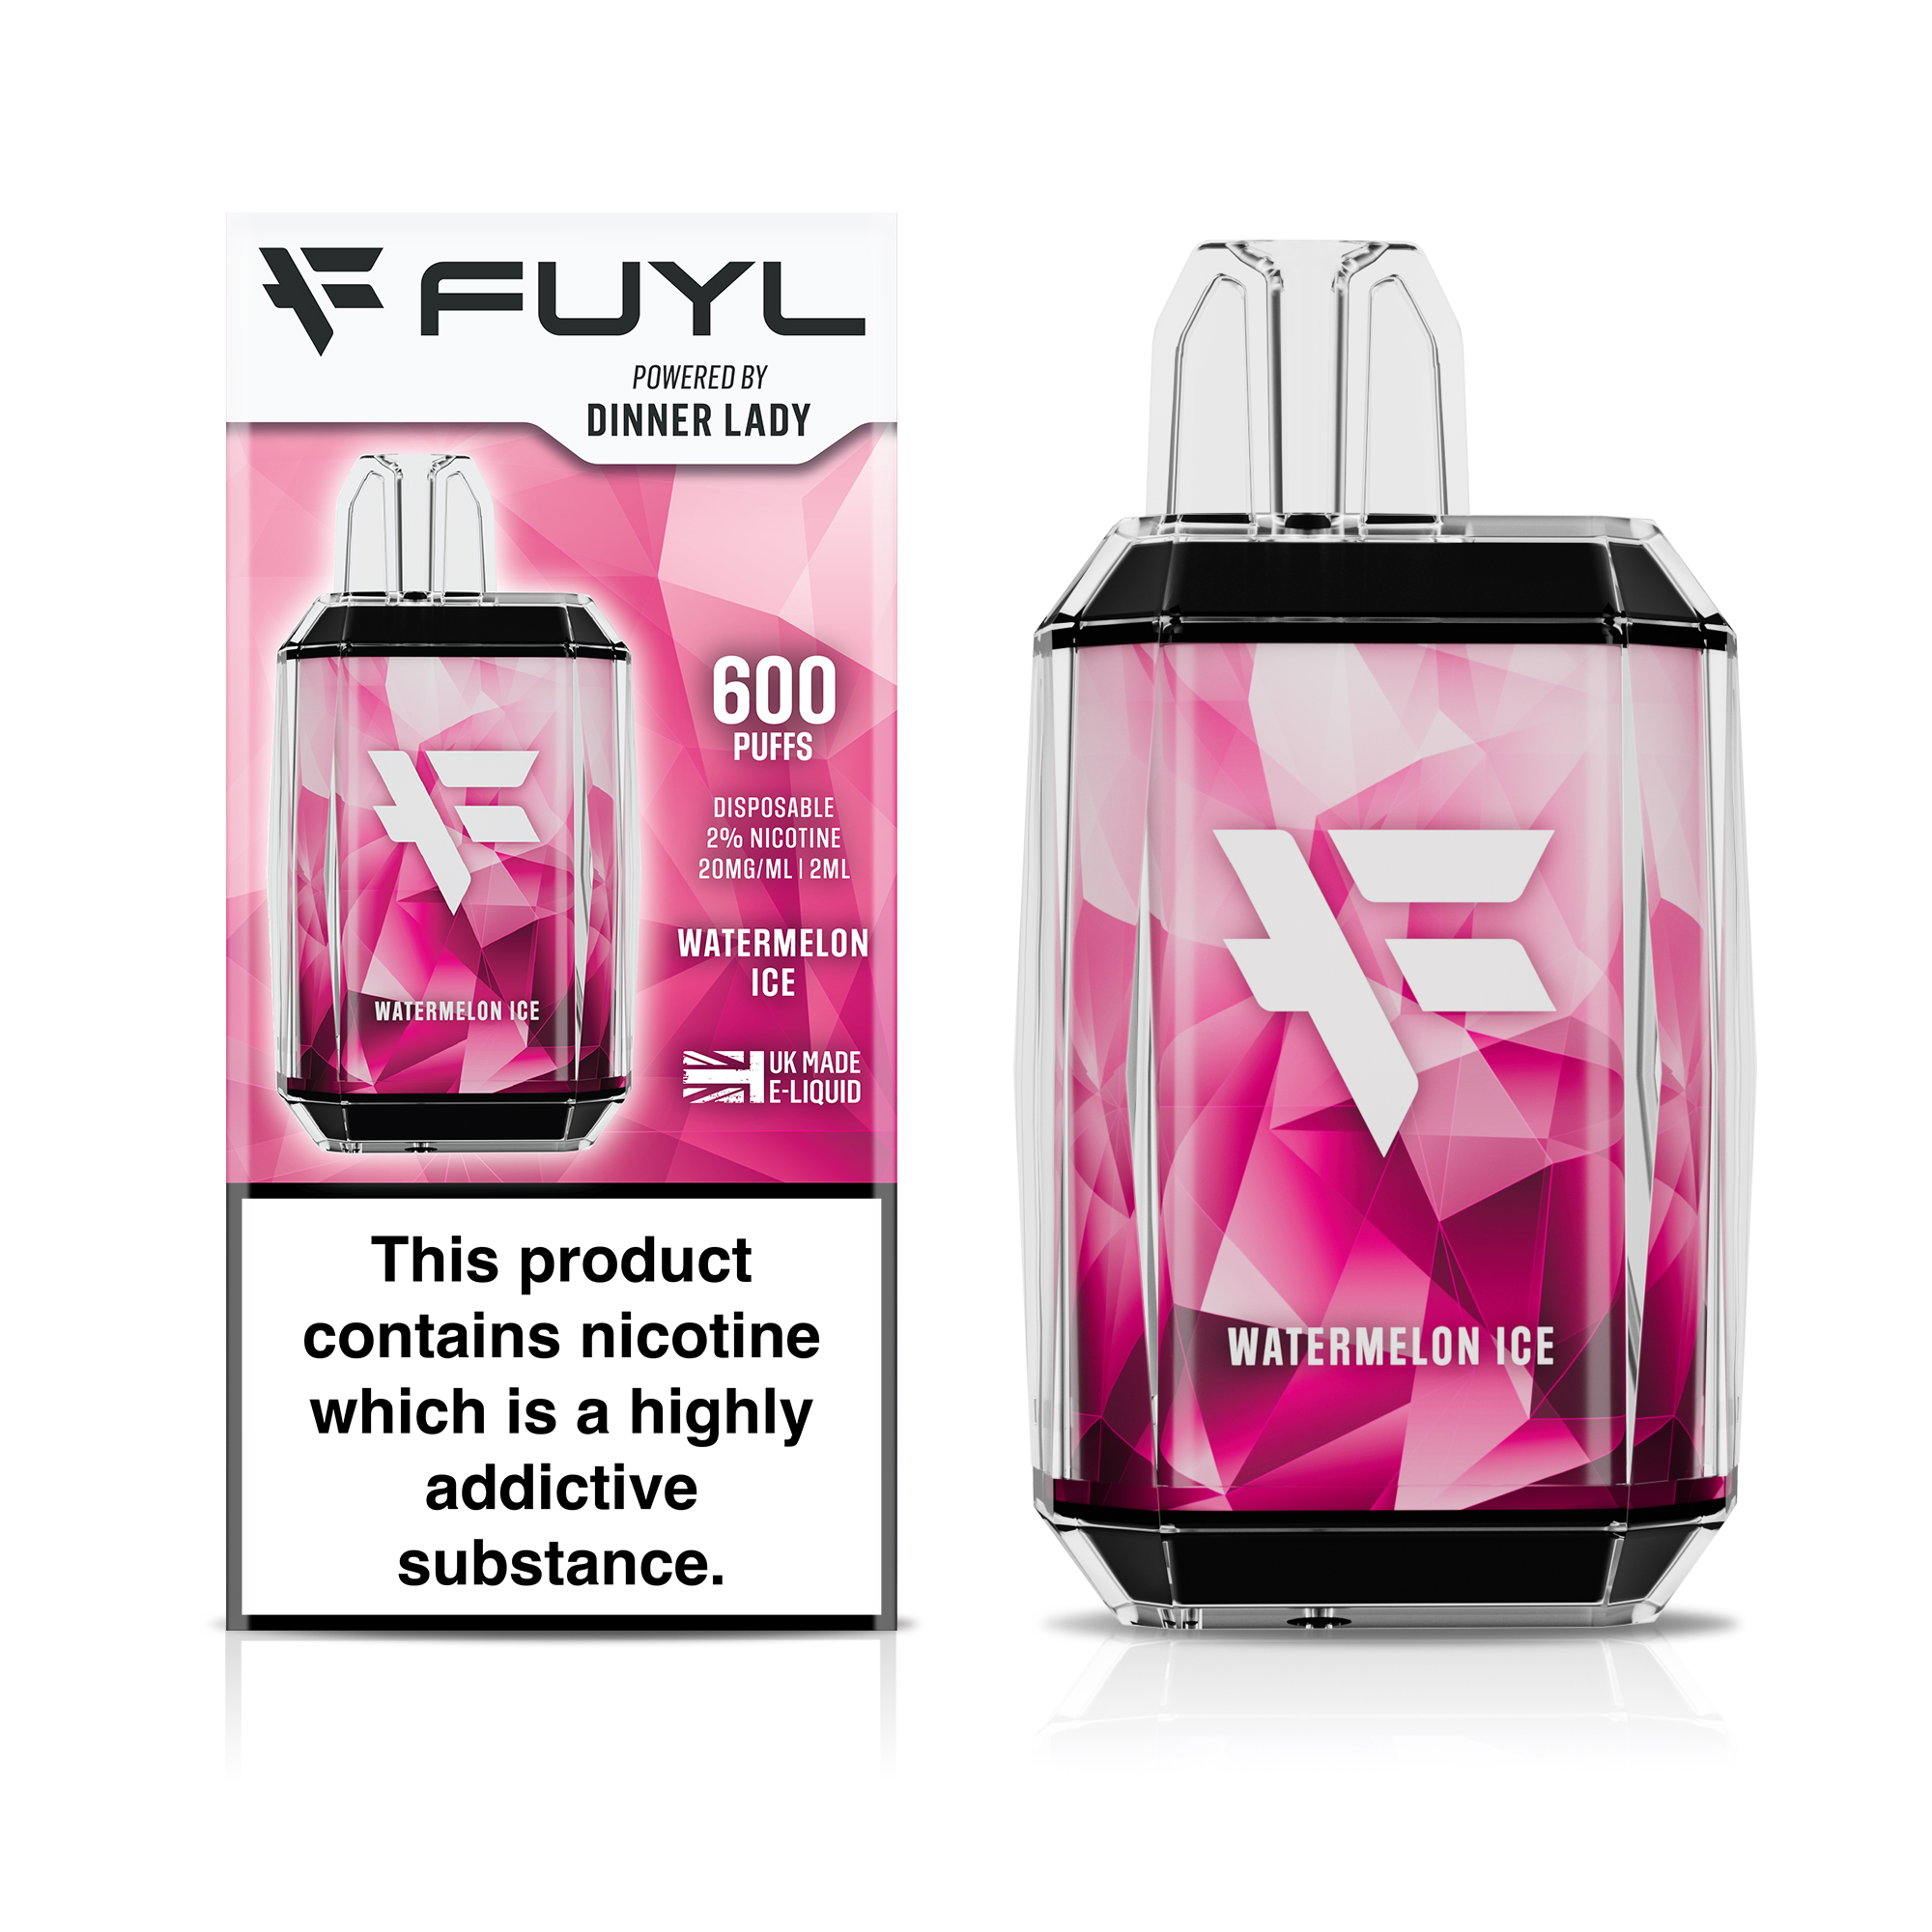 Watermelon Ice by Fuyl Dinner Lady 600puff Disposable